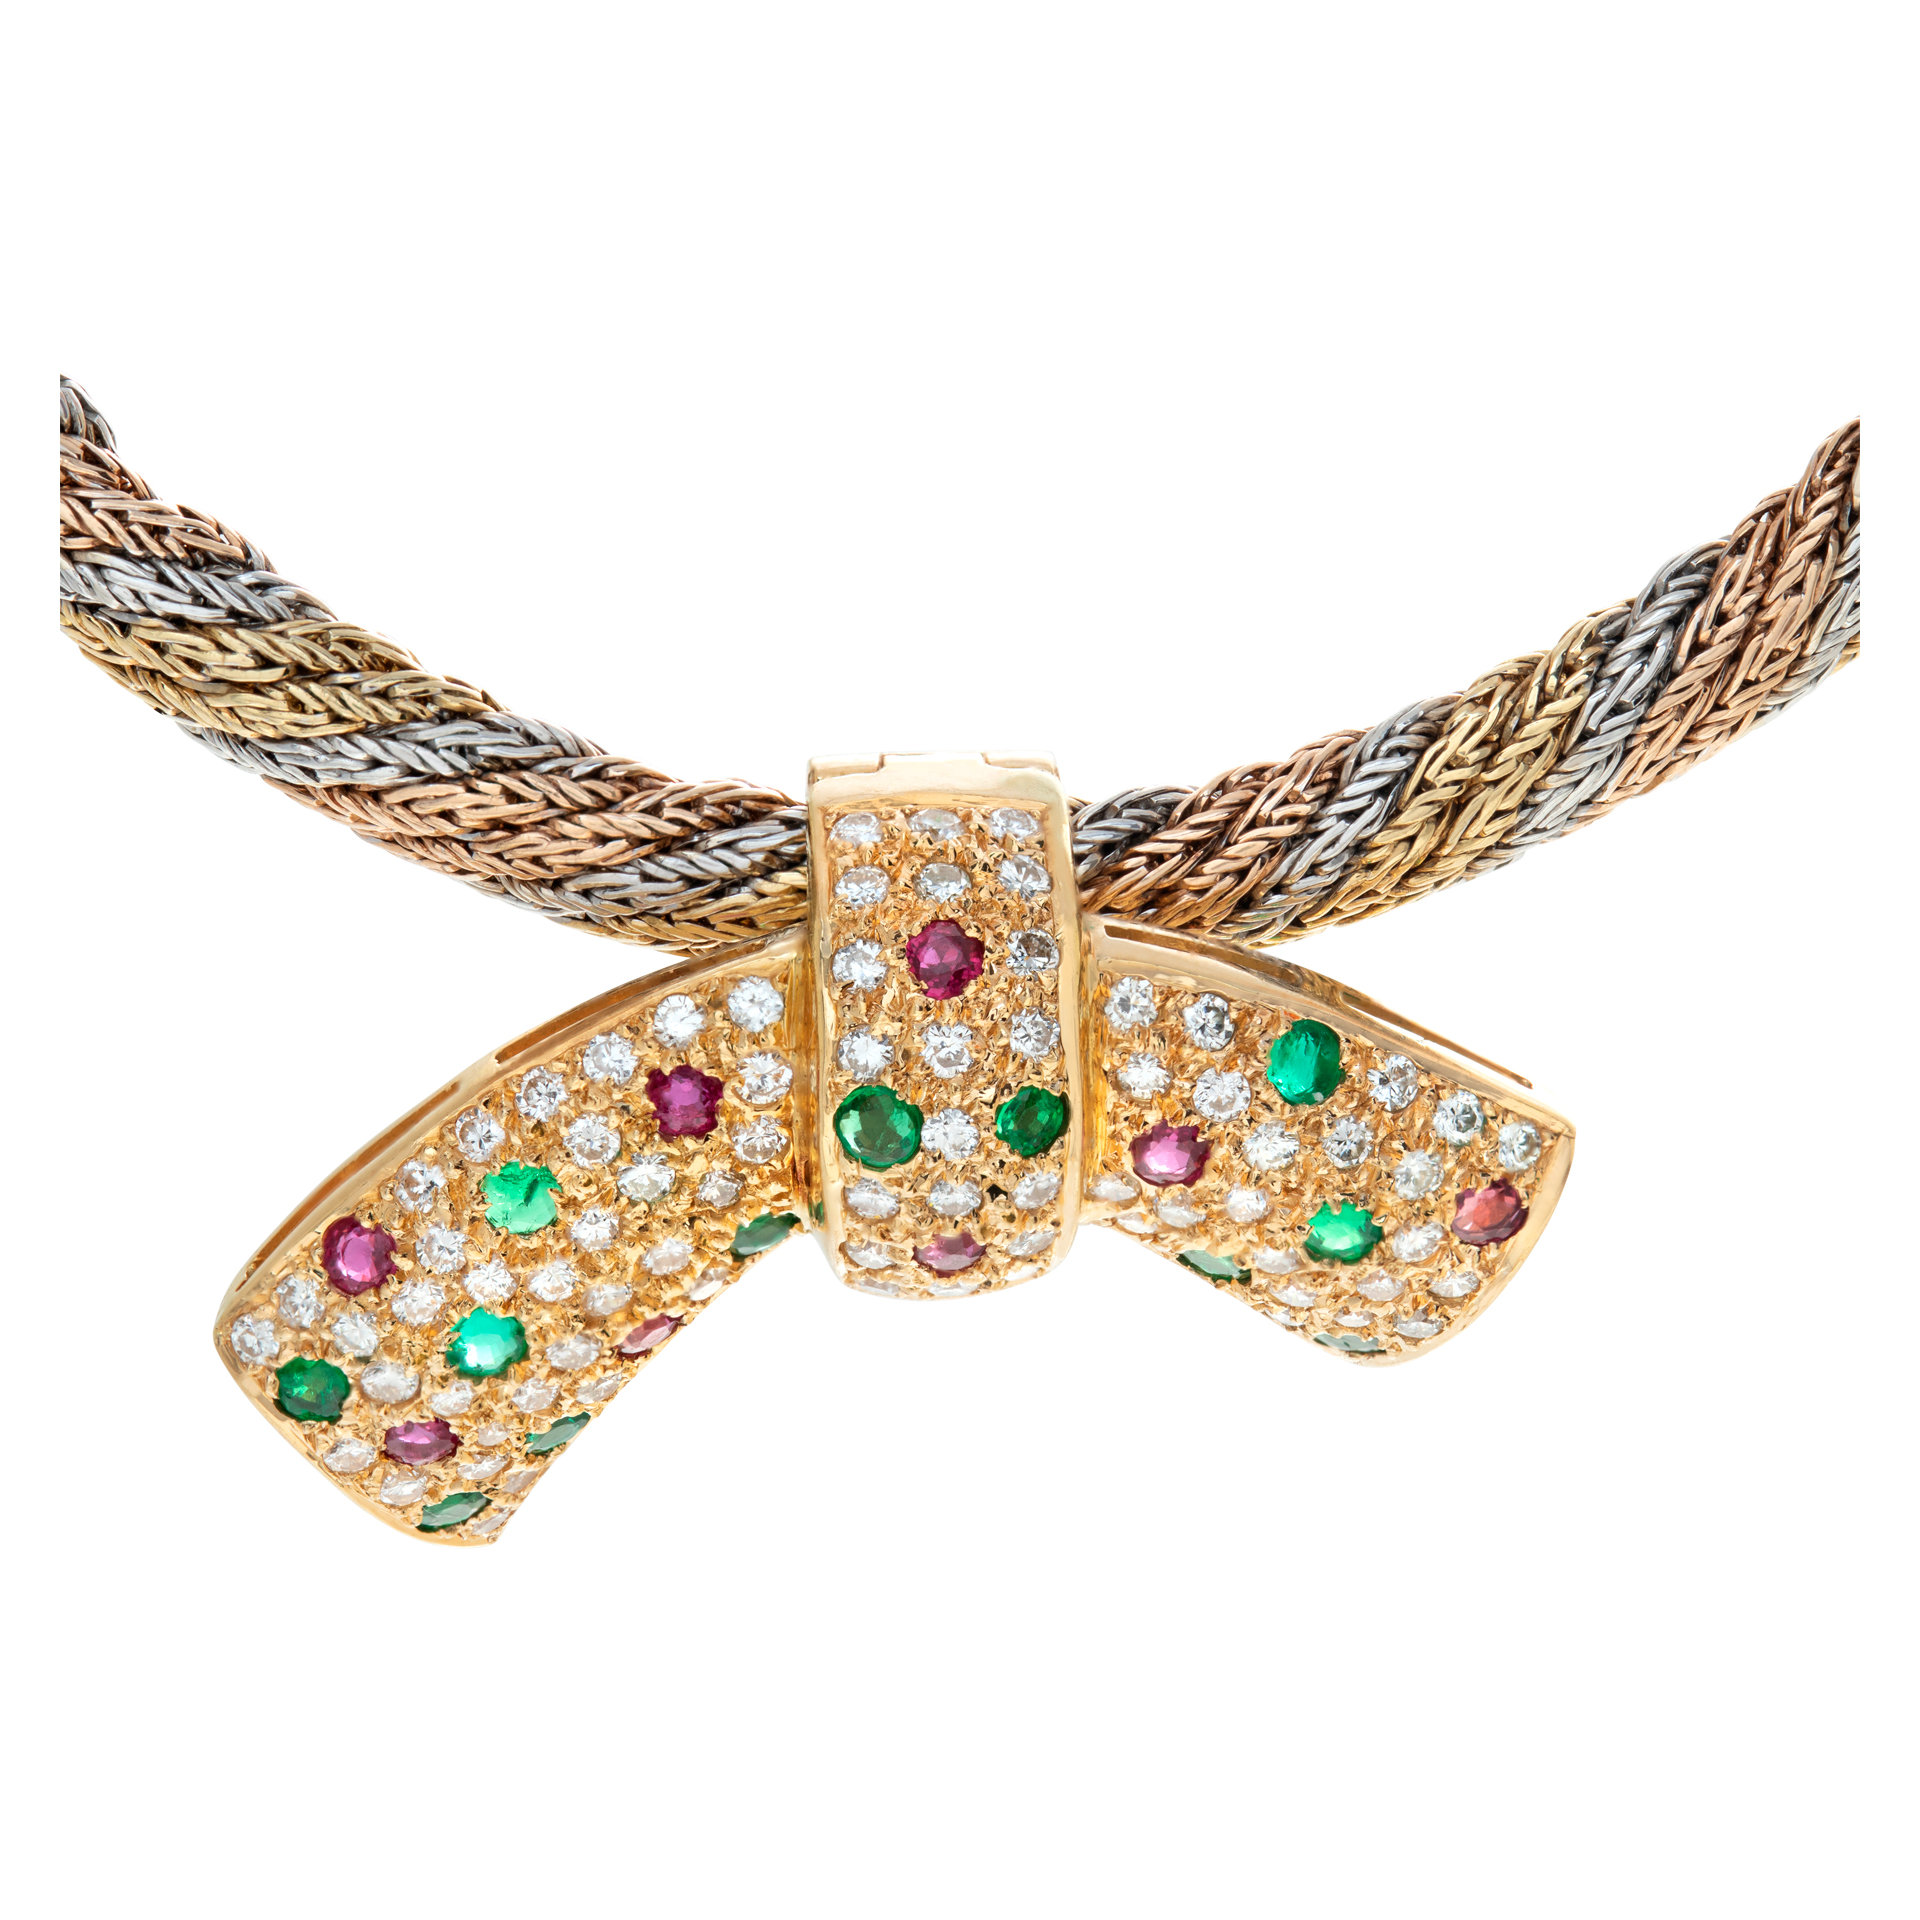 18k tri-tone necklace with bow of diamonds, rubies, and emeralds